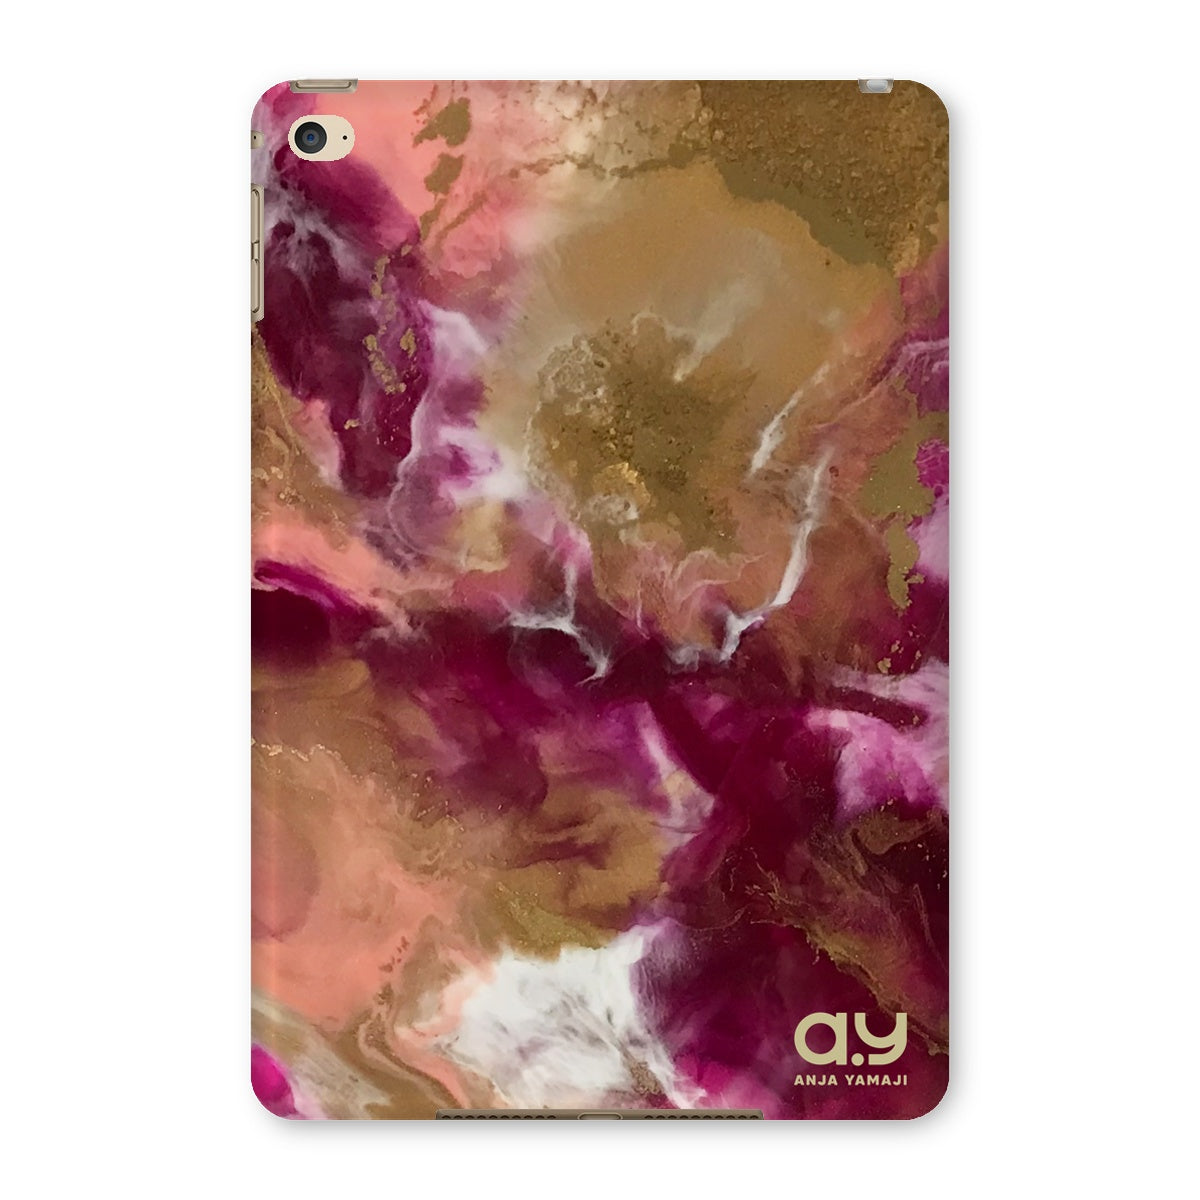 AETHER Tablet Cases